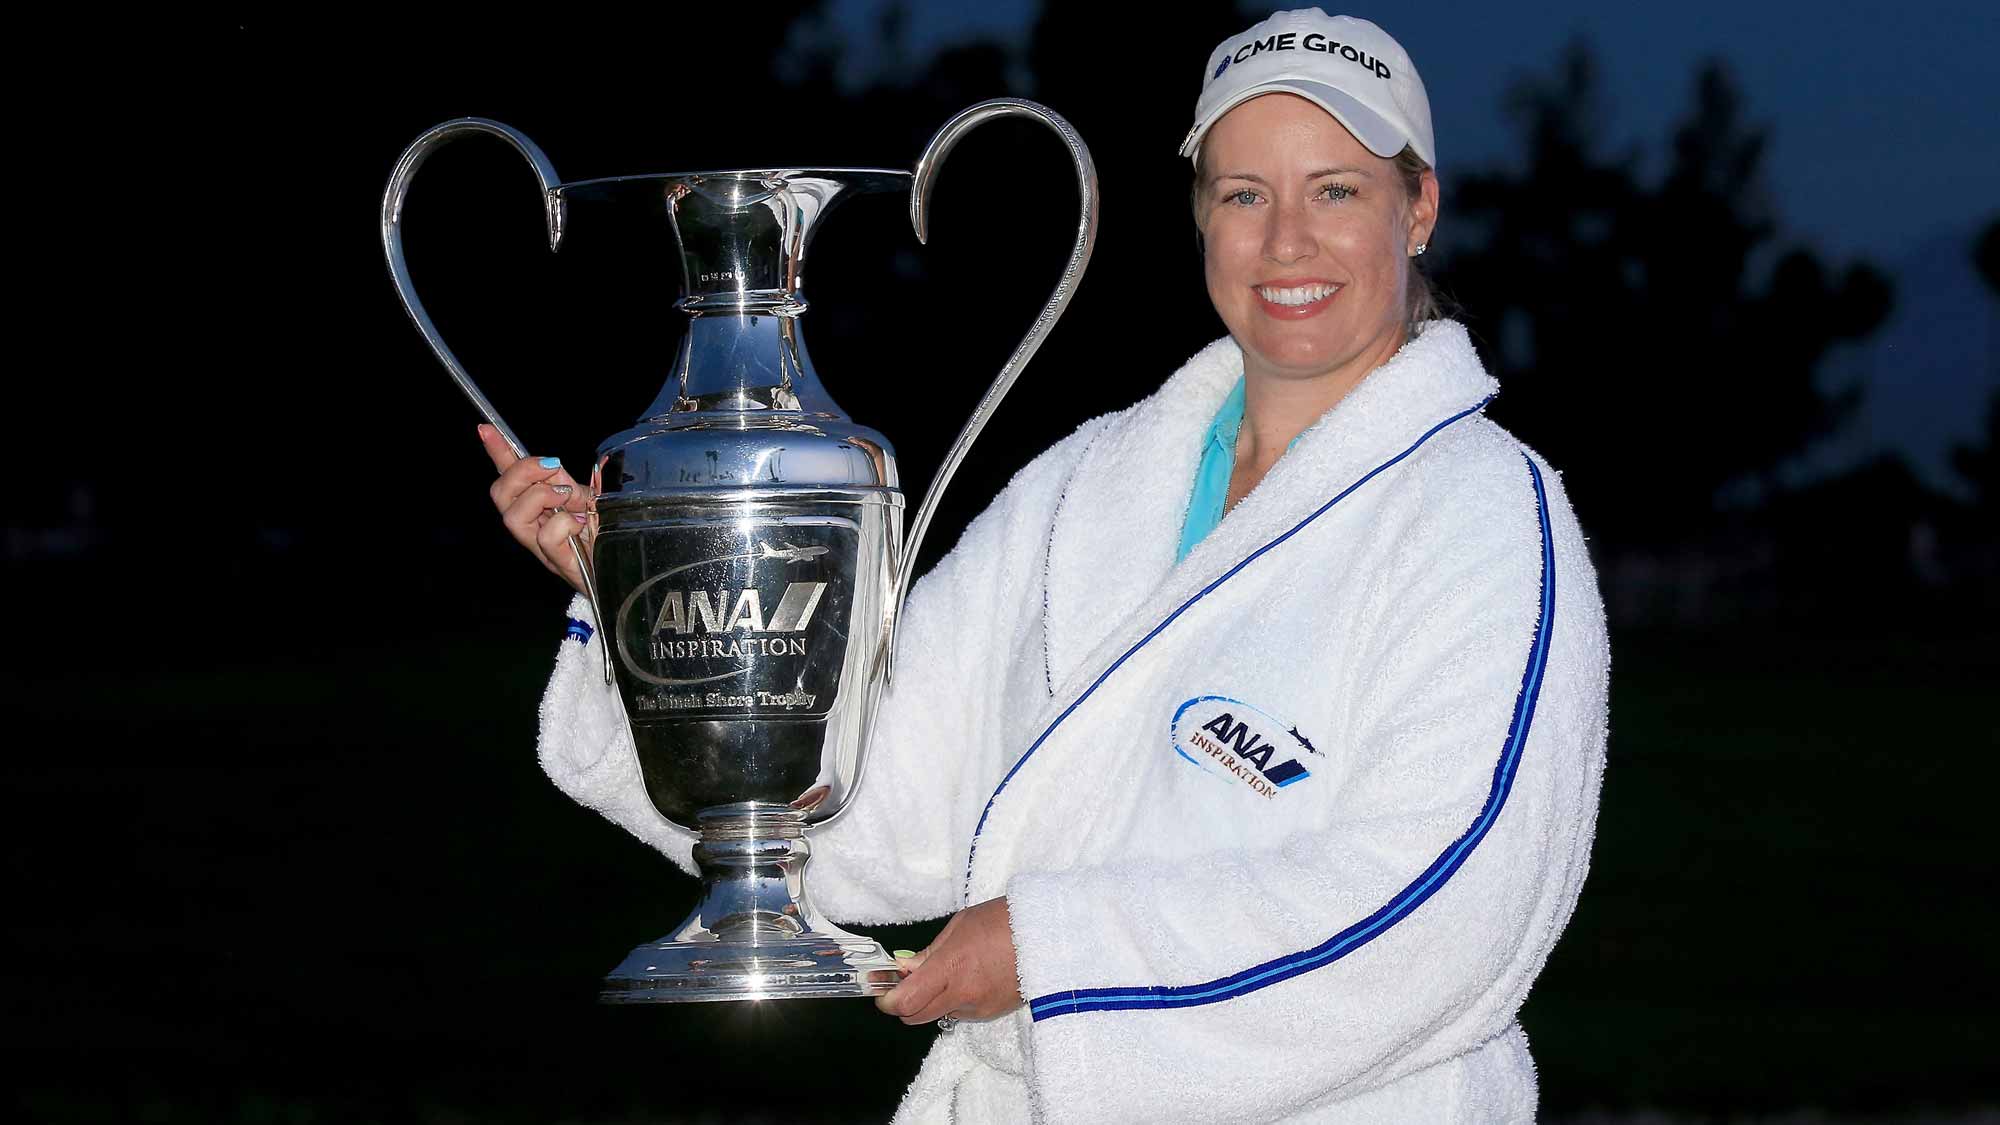 Brittany Lincicome of the USA holds the trophy after her play-off win in the final round of the ANA Inspiration on the Dinah Shore Tournament Course at Mission Hills Country Club